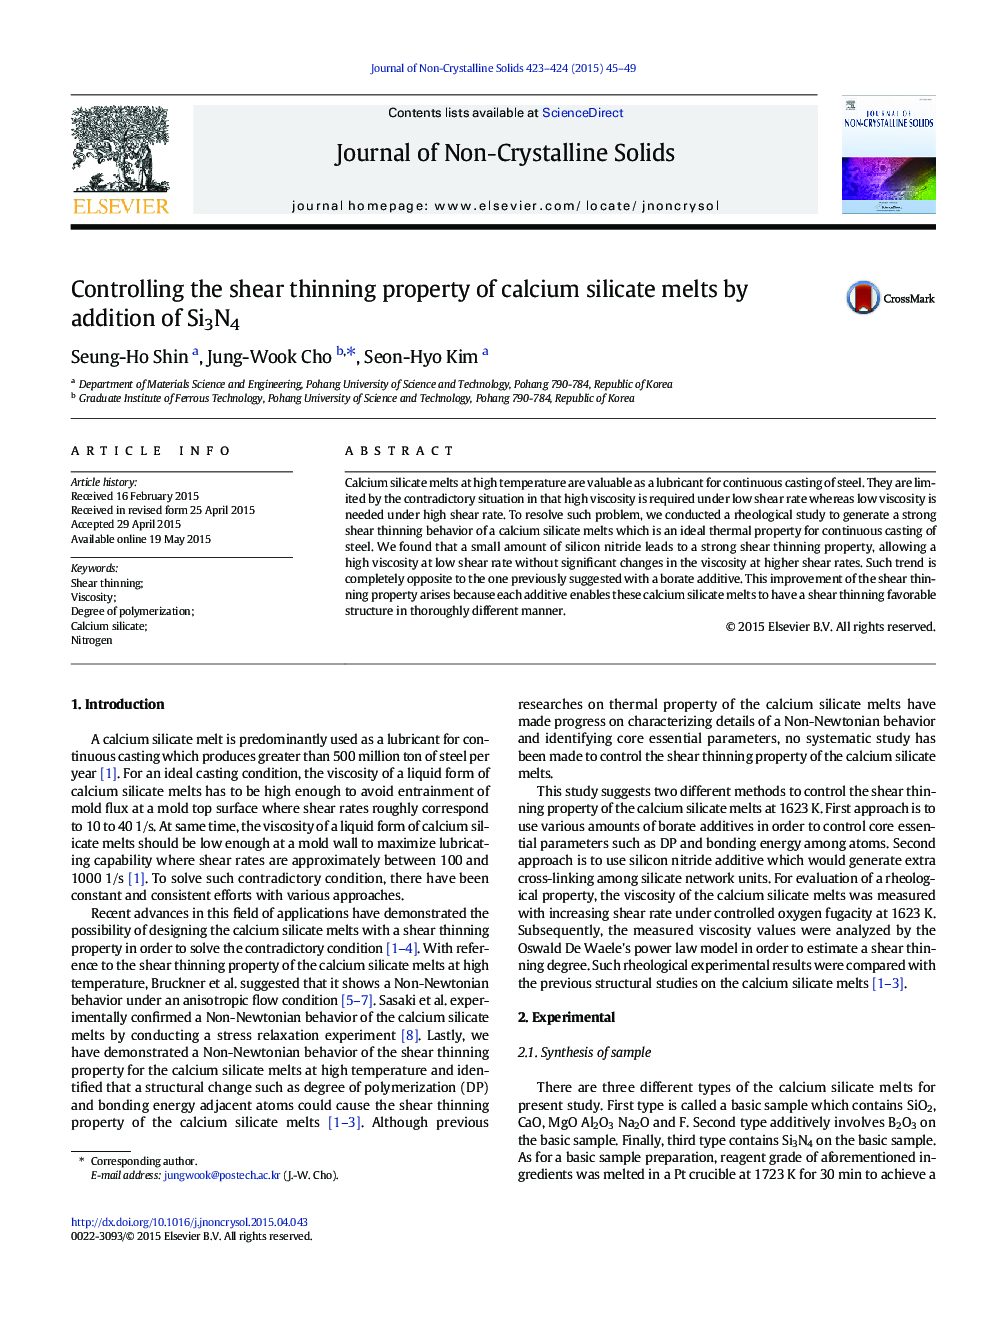 Controlling the shear thinning property of calcium silicate melts by addition of Si3N4